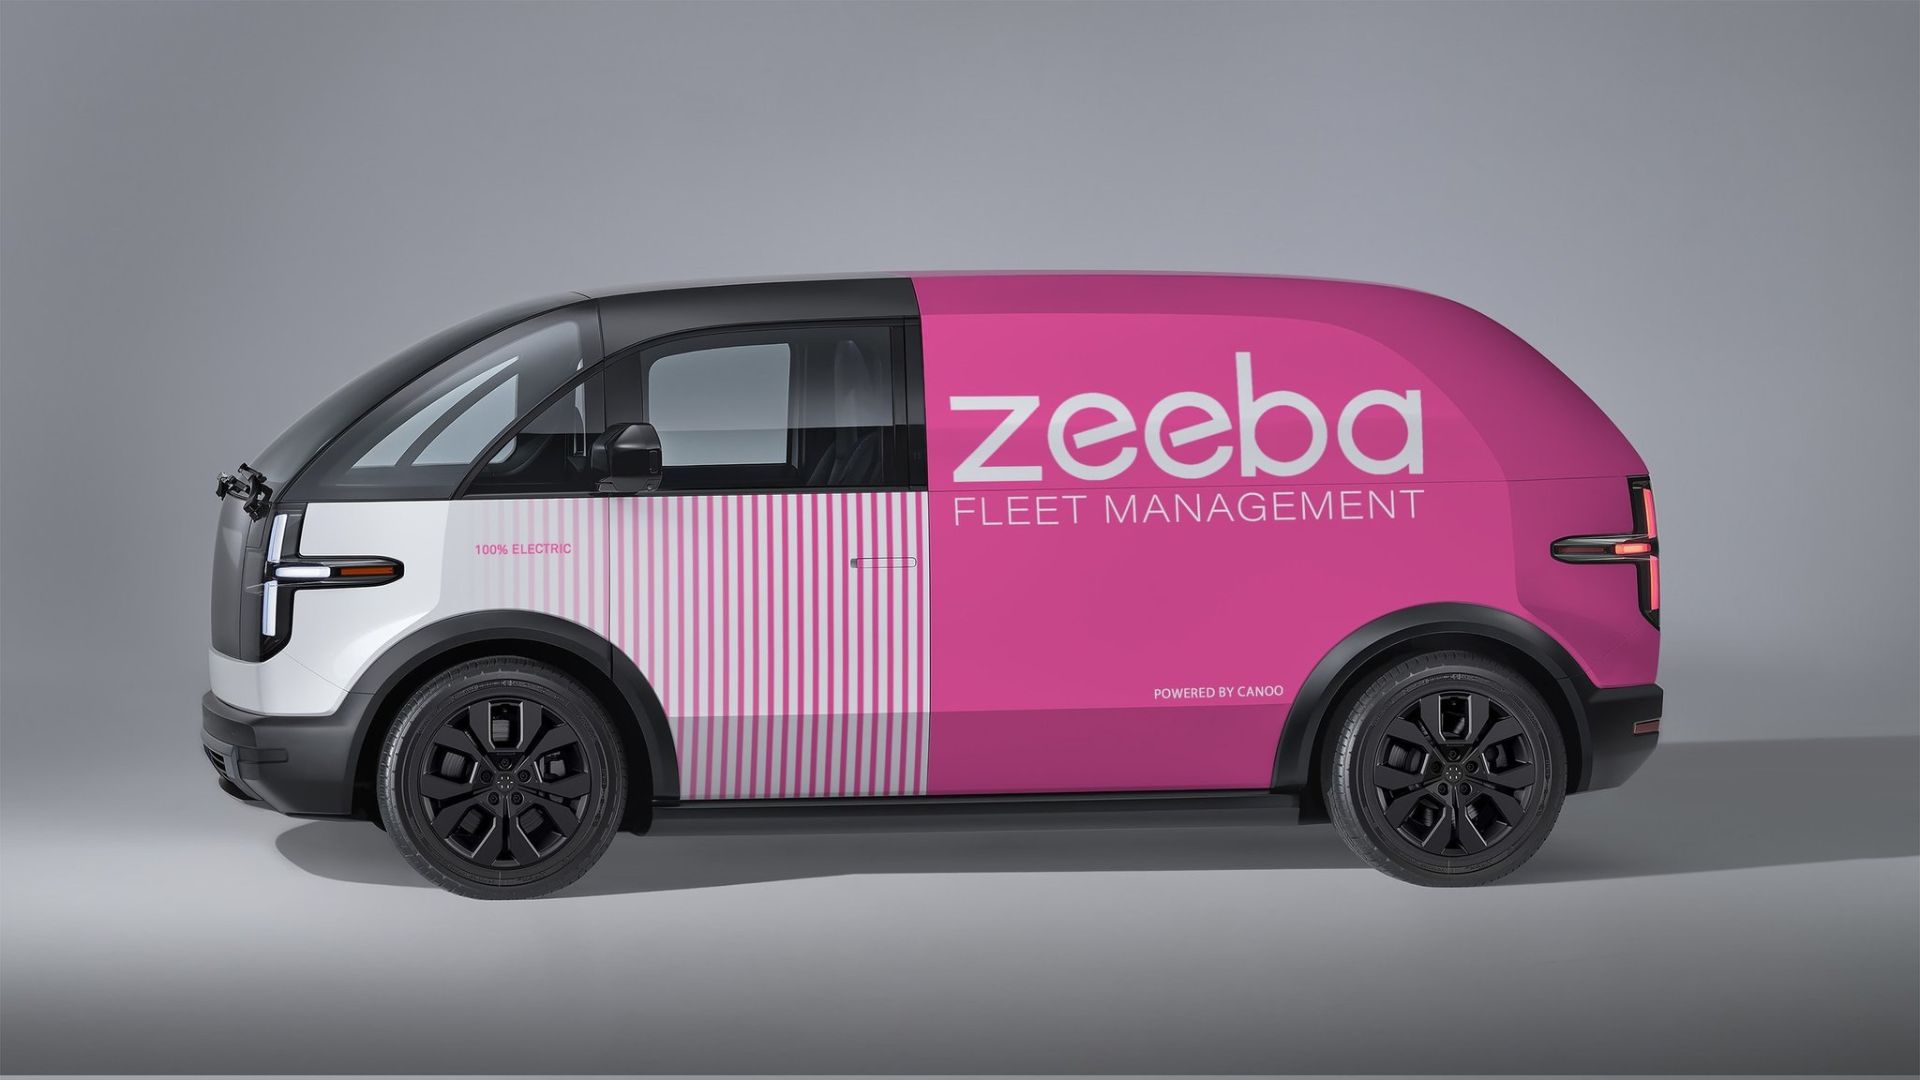 https://e-vehicleinfo.com/global/canoo-secured-a-deal-with-zeeba-for-3000-electric-vehicles/